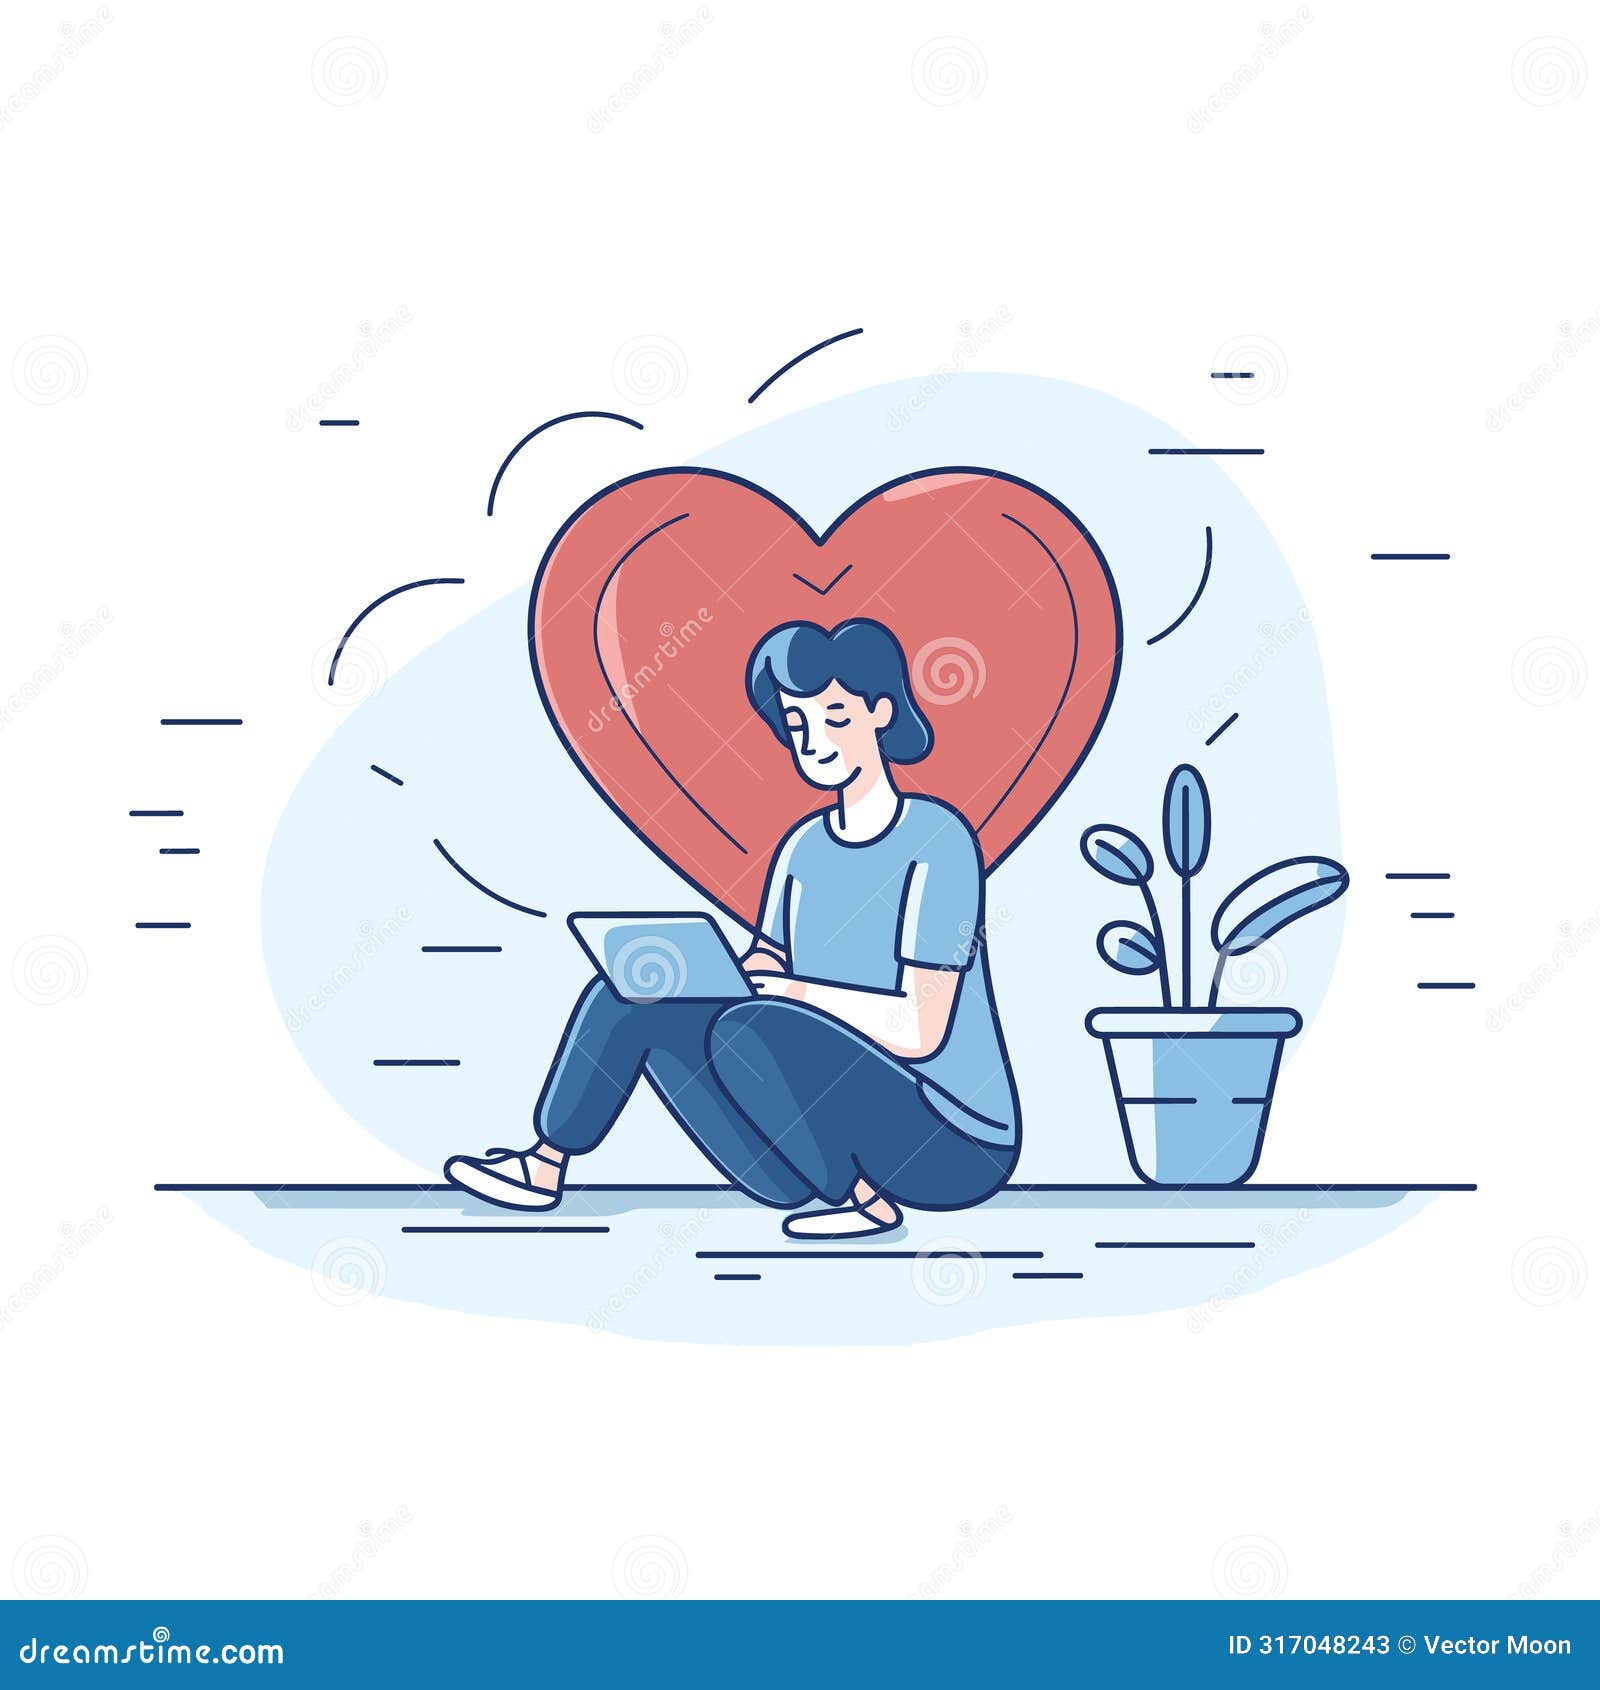 young woman sits comfortably using laptop, large heart background, suggesting love digital work